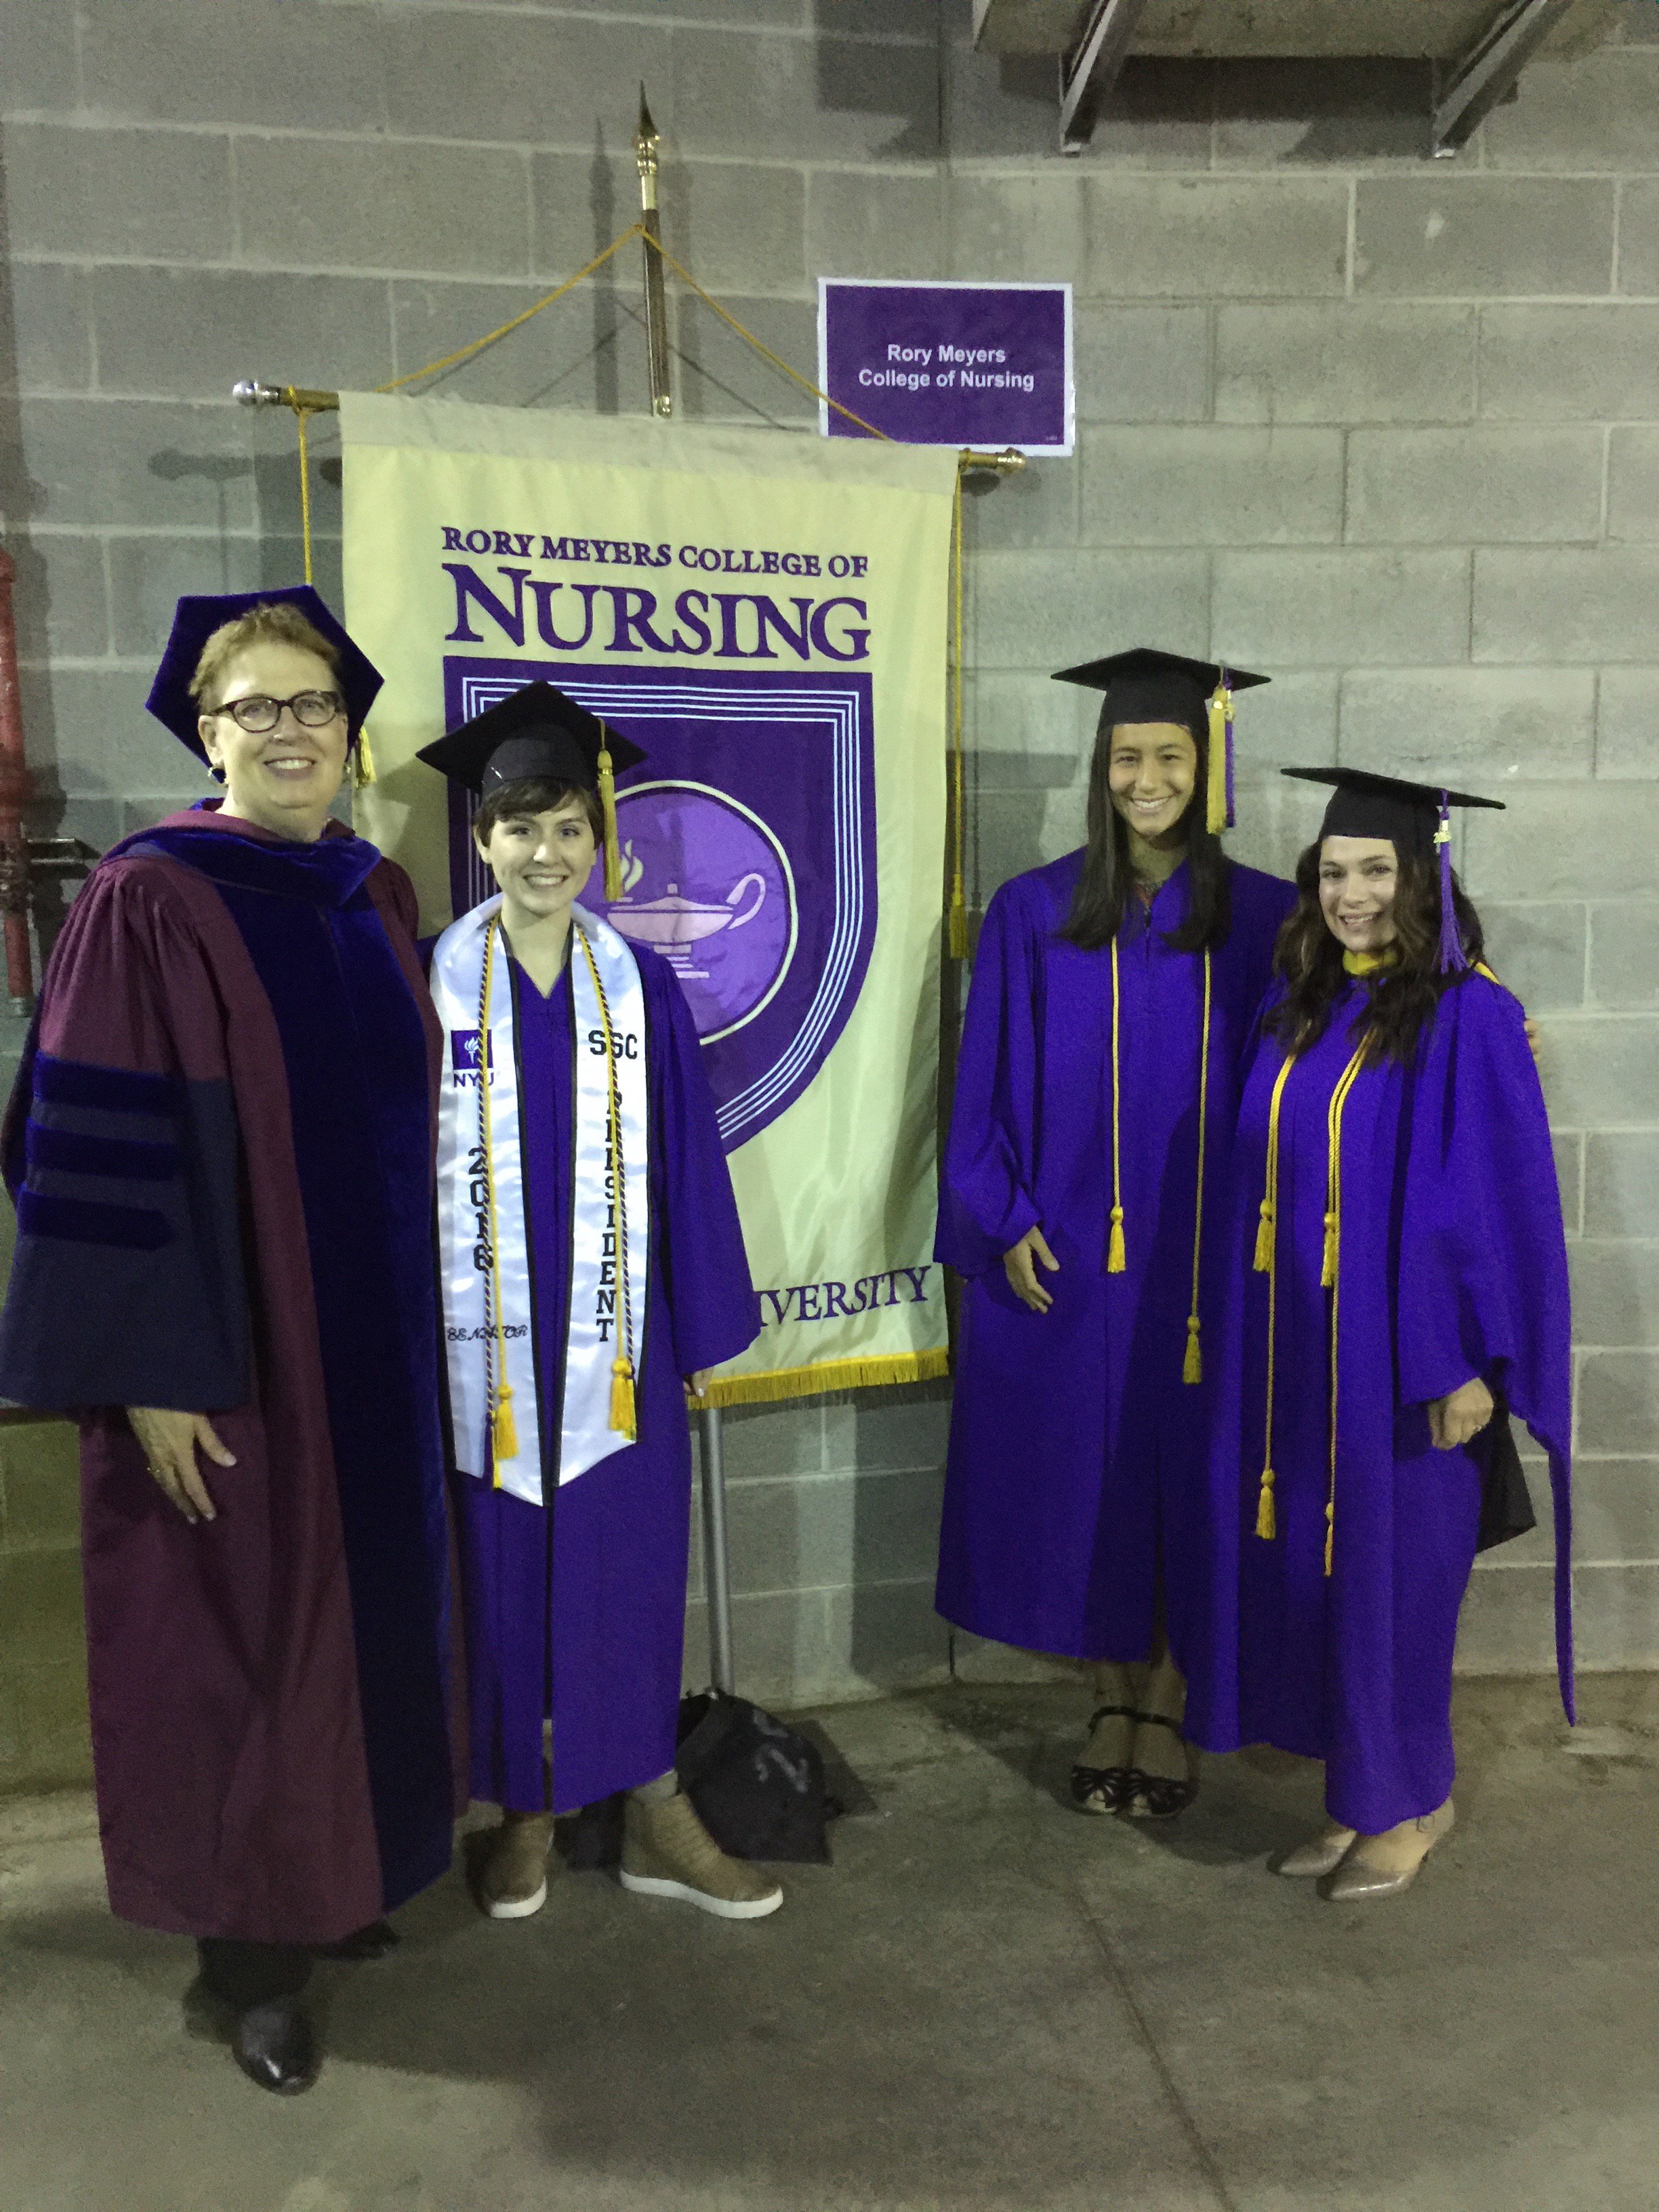 NYU Rory Meyers College of Nursing on Twitter: "Here's Dean Sullivan-Marx,  Evelyn Cunningham, Emily Yin & Nicole Cerussi w/ our new Meyers banner!  #nyucommencement https://t.co/B1m3gfqN8n" / Twitter